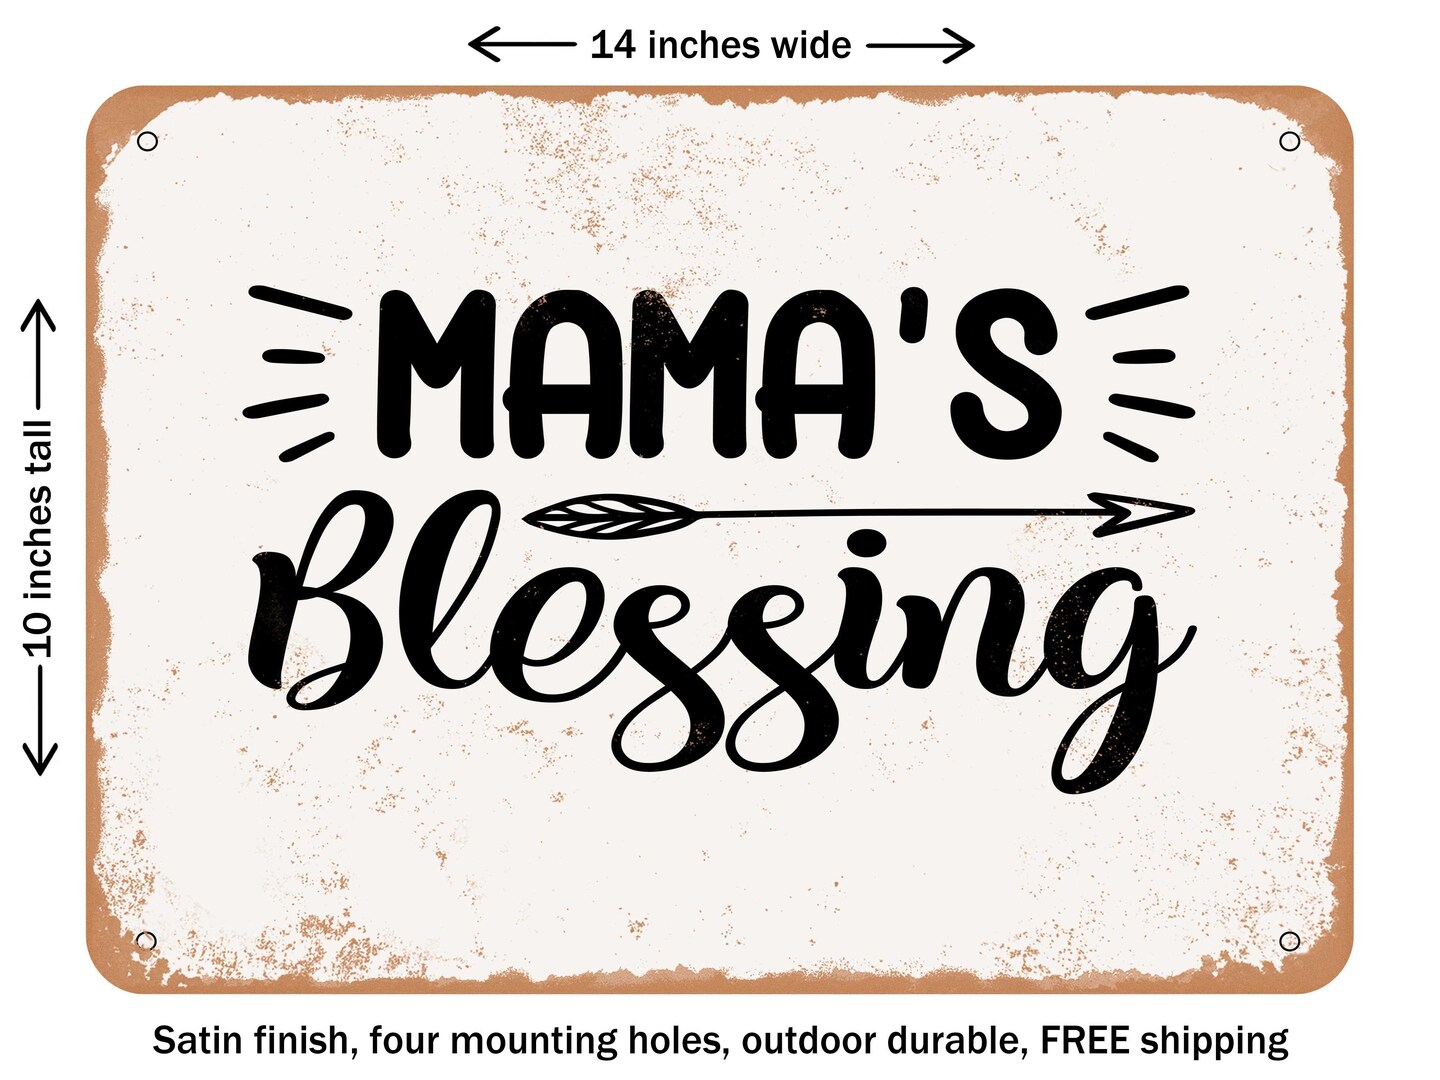 DECORATIVE METAL SIGN - Mamas Blessing - 7 - Vintage Rusty Look